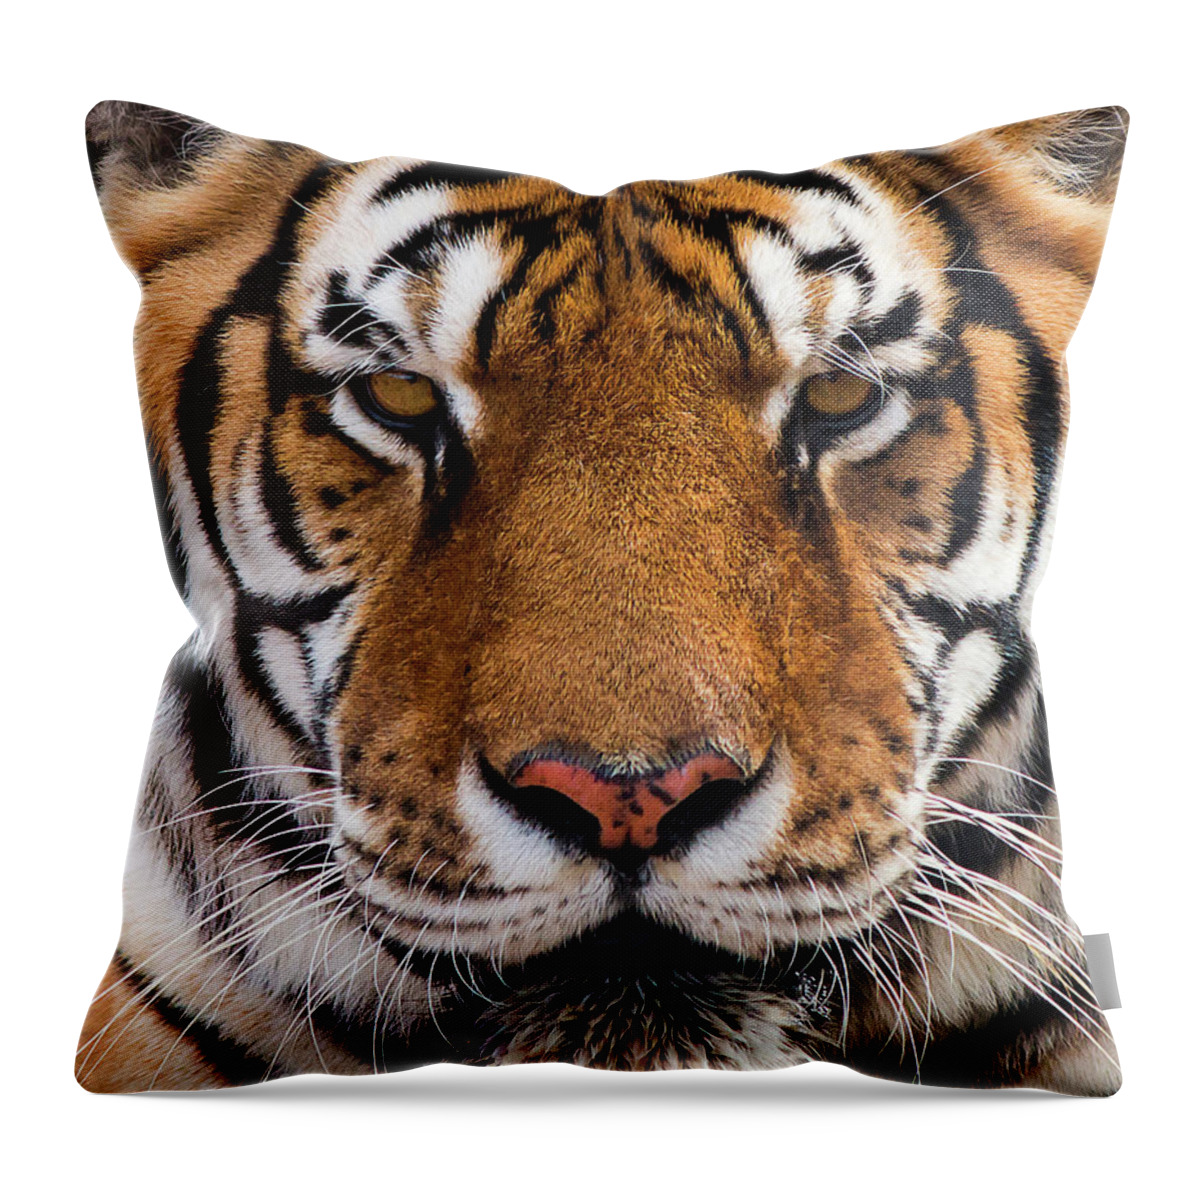 Heidenreich Throw Pillow featuring the photograph Hunter's Displeasure by American Landscapes